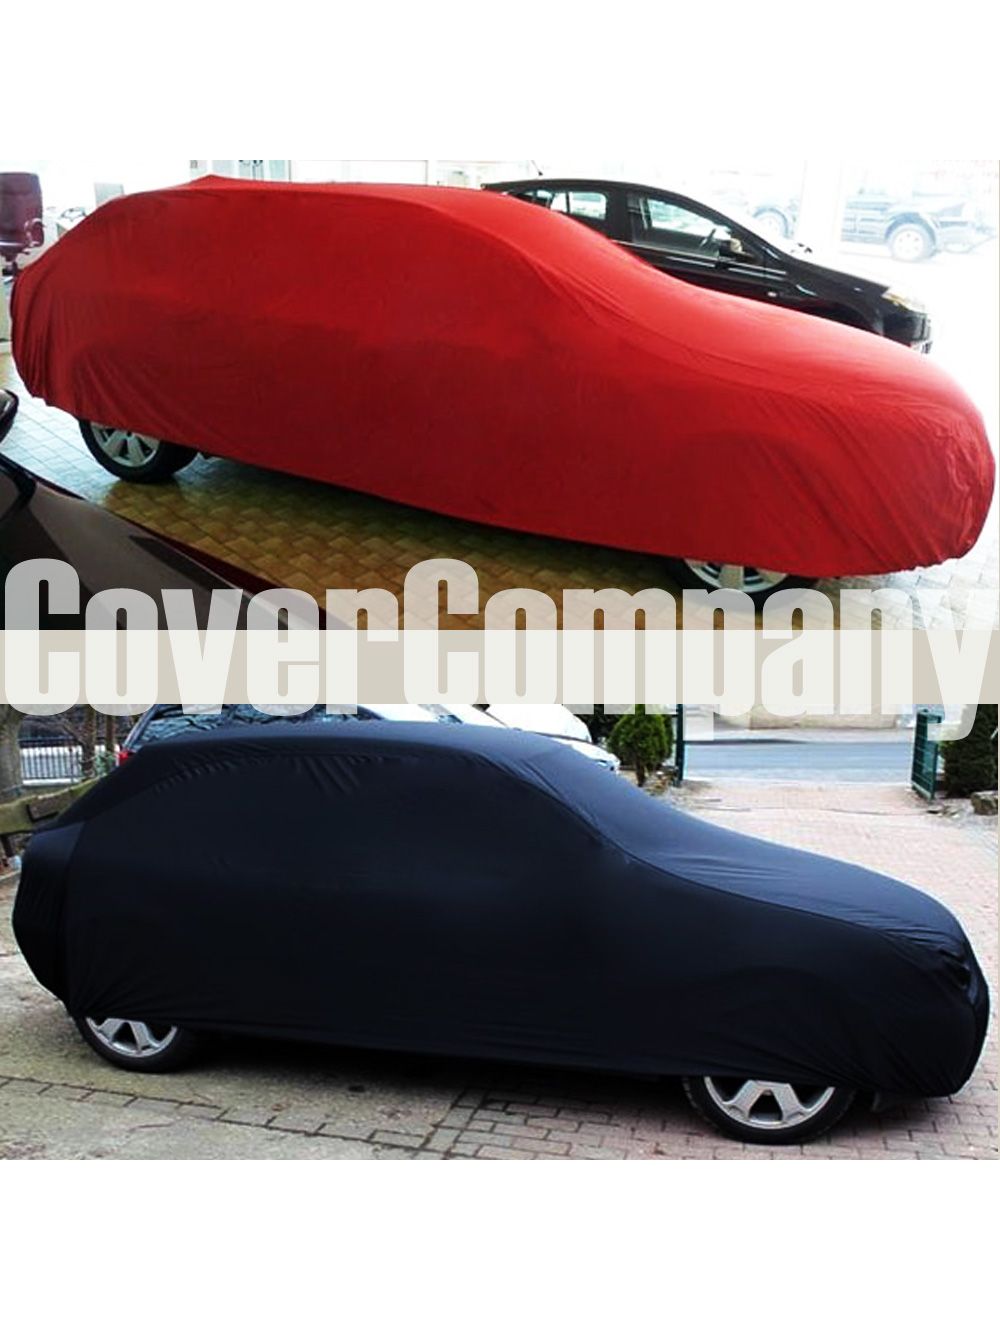 Audi Car Covers. Indoor Car Cover for Audi UK